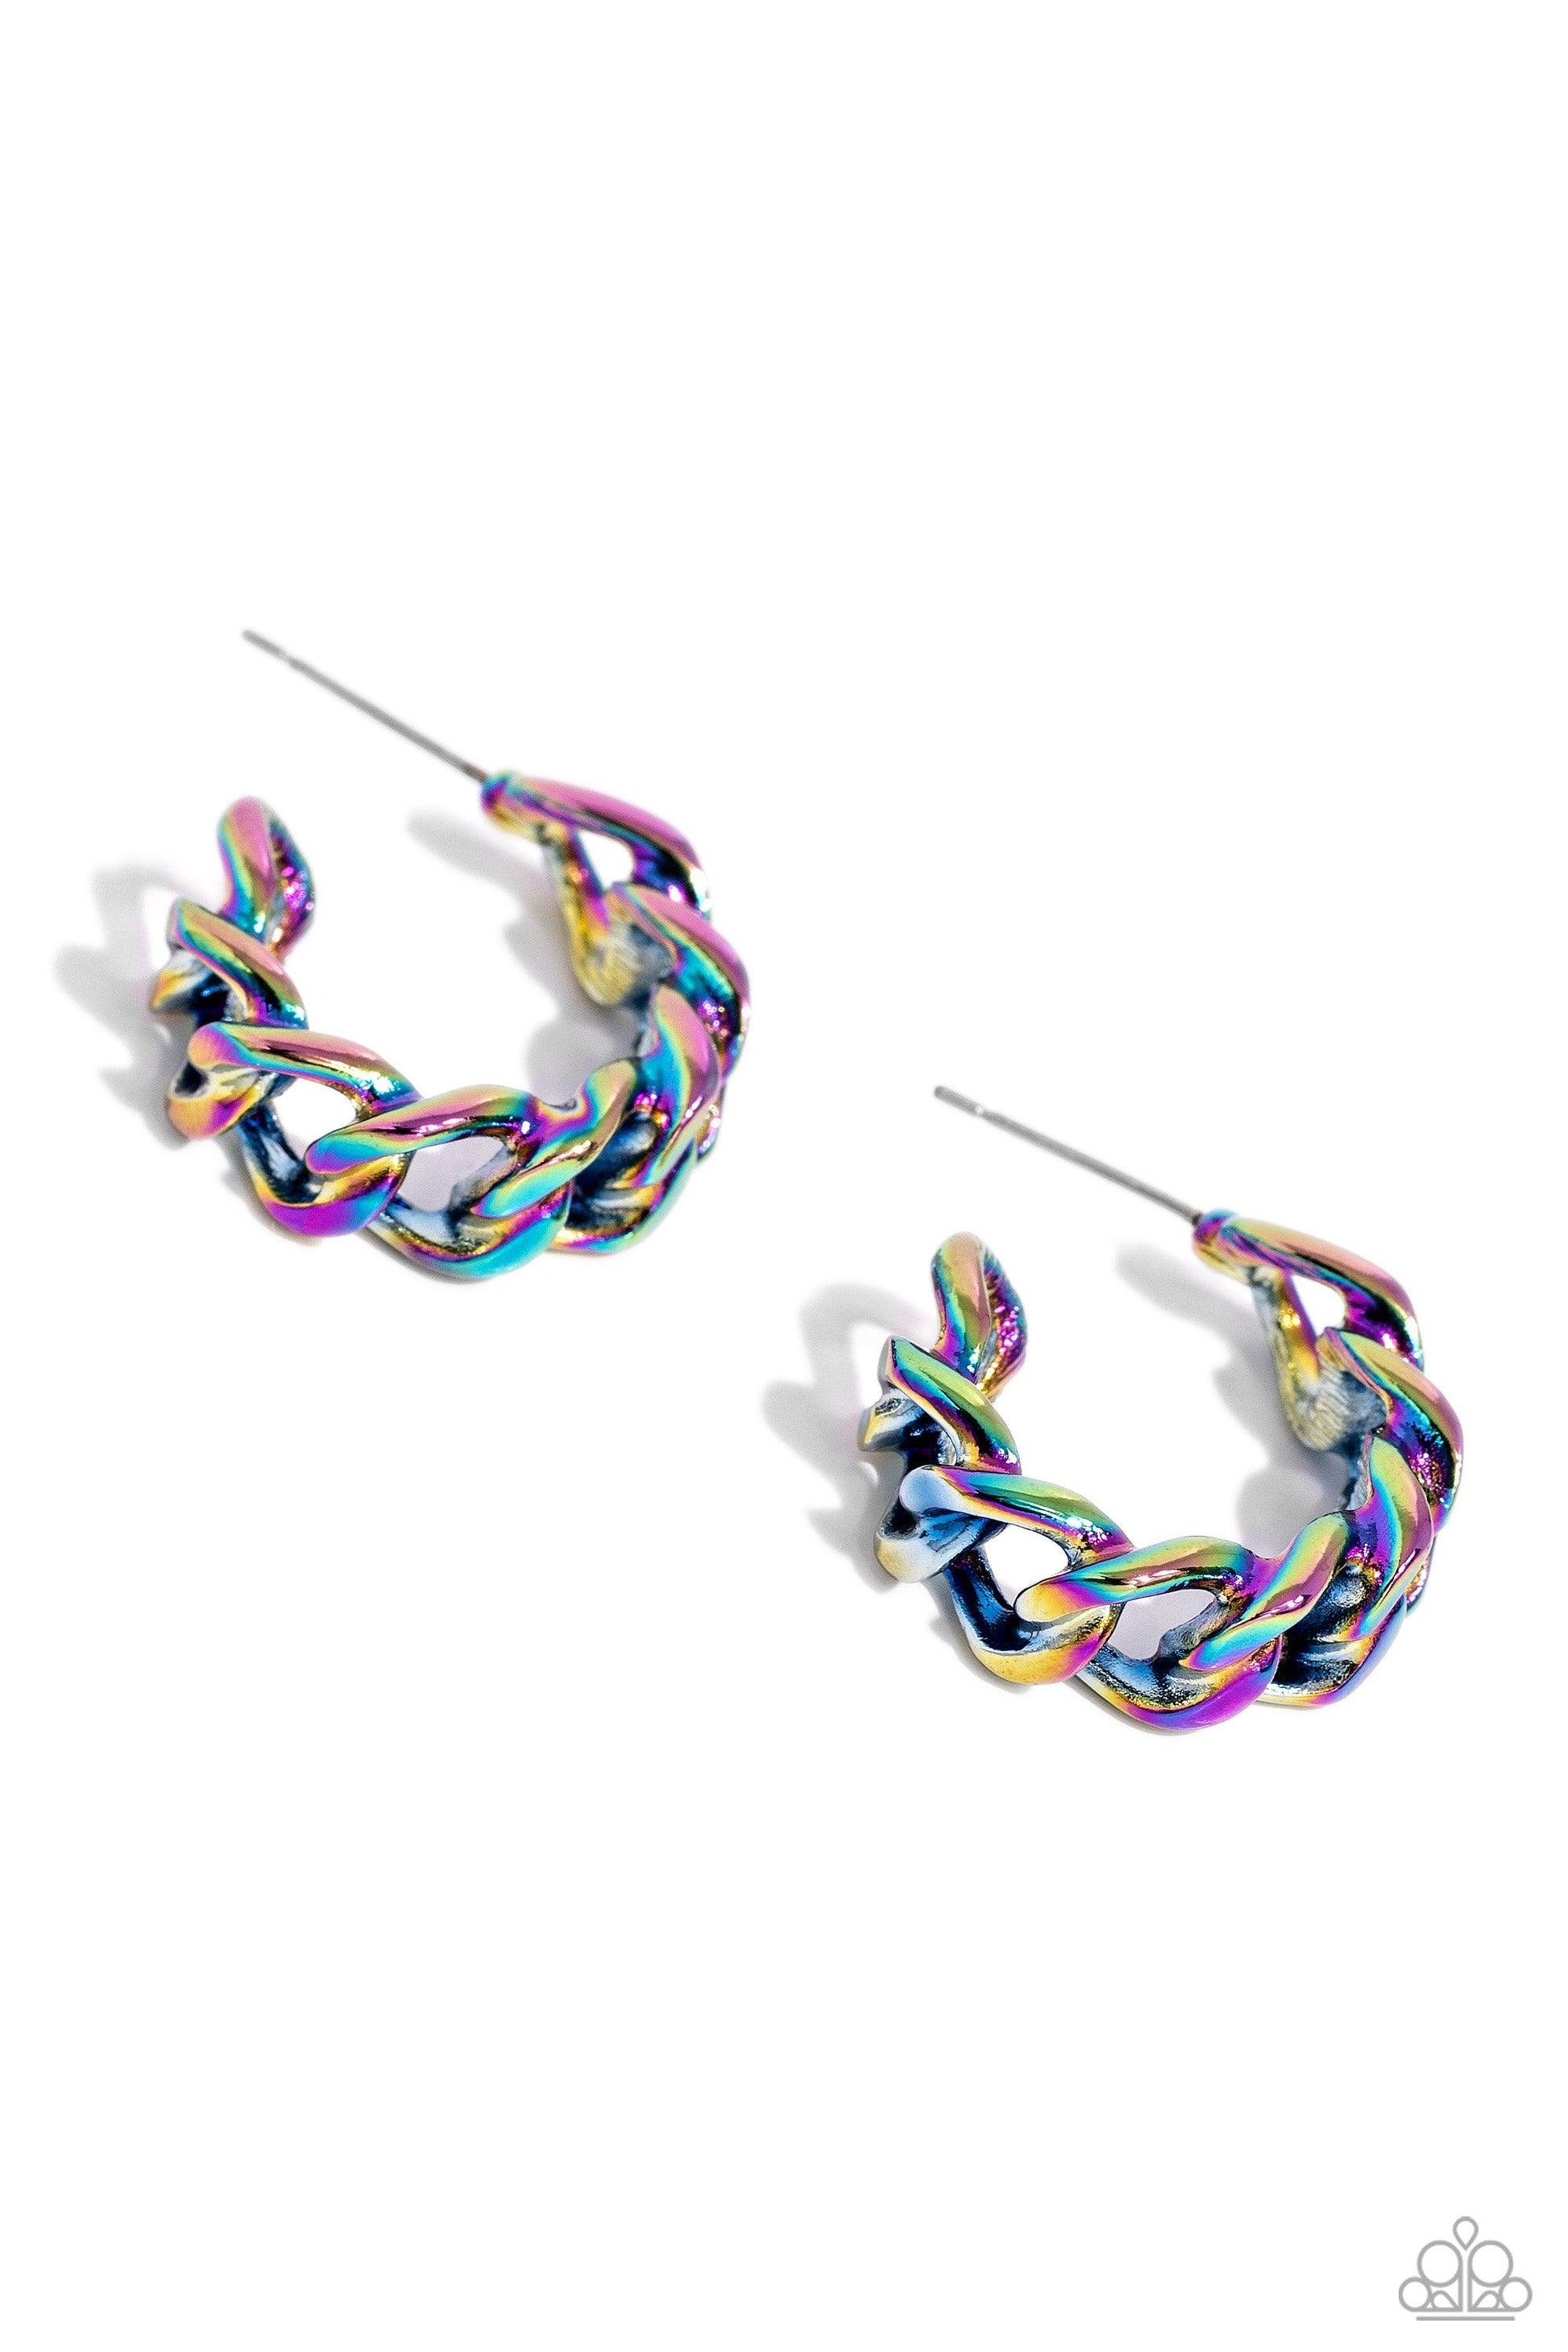 Paparazzi Accessories - Casual Confidence - Multicolor Hoop Earrings - Bling by JessieK